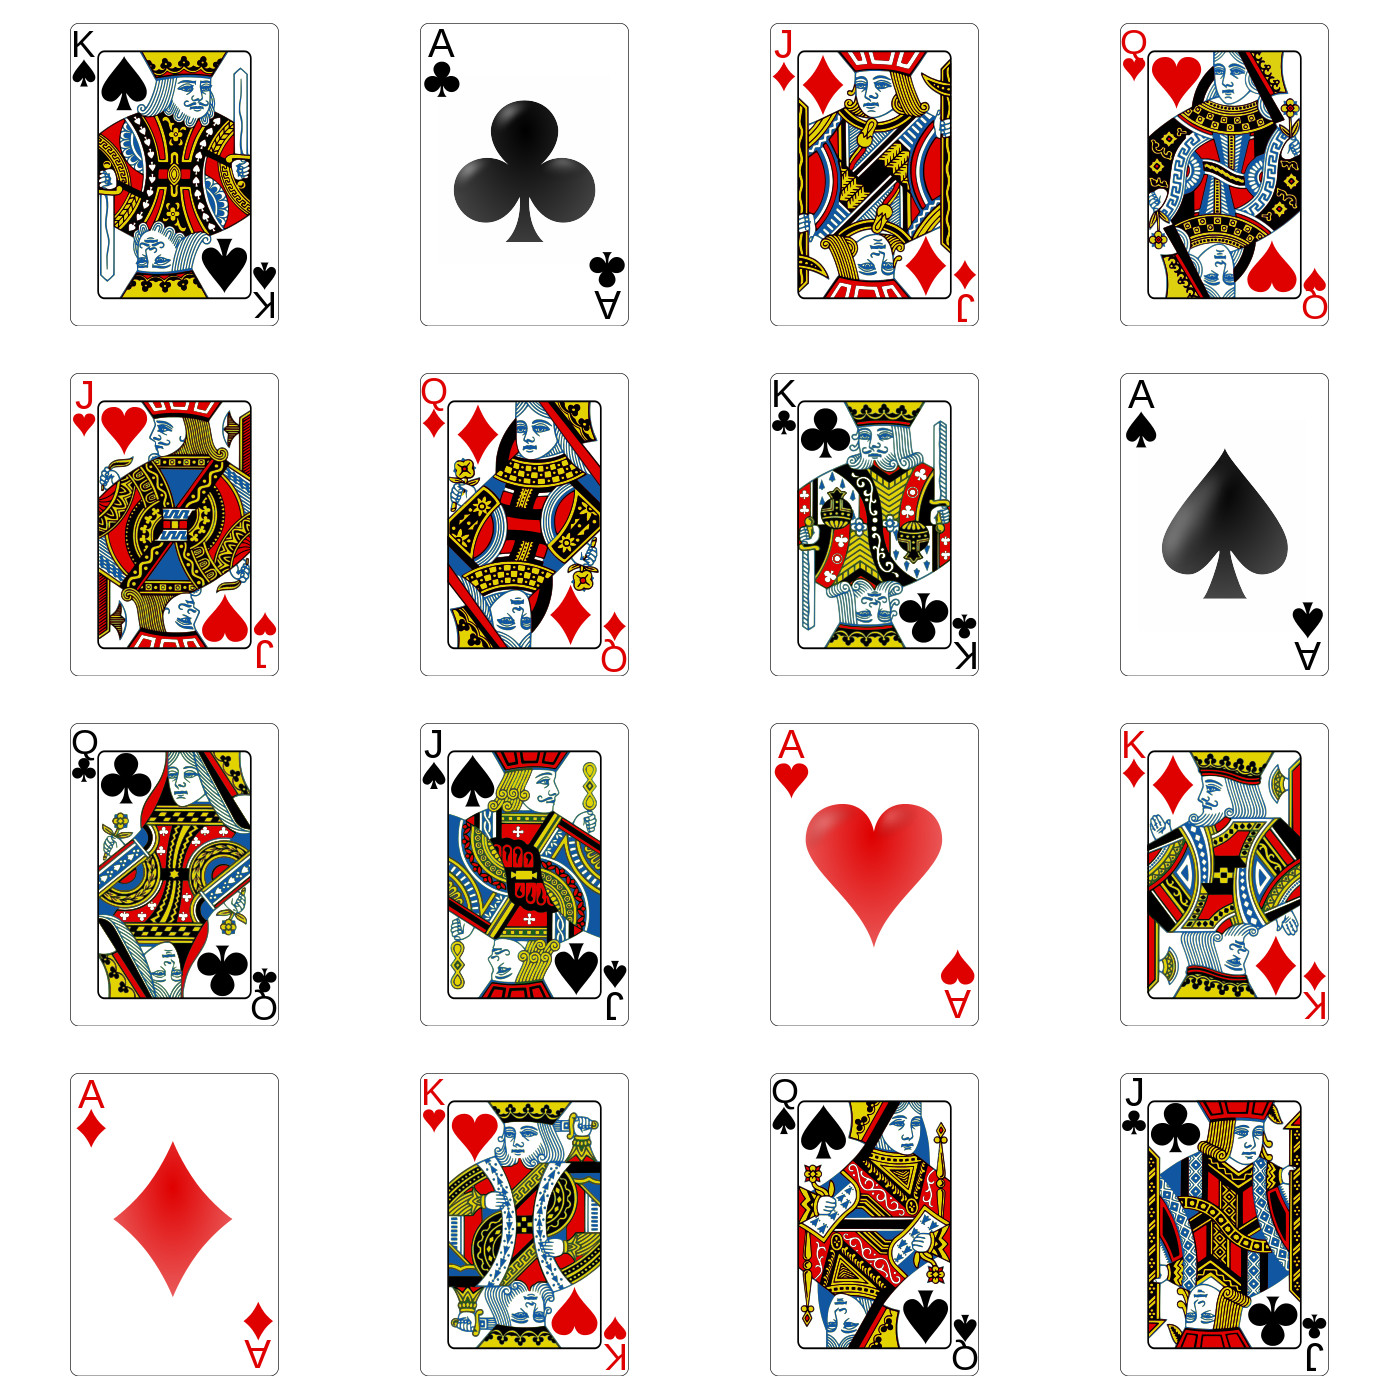 https://commons.wikimedia.org/wiki/Category:Playing_cards_set_by_Byron_Knoll